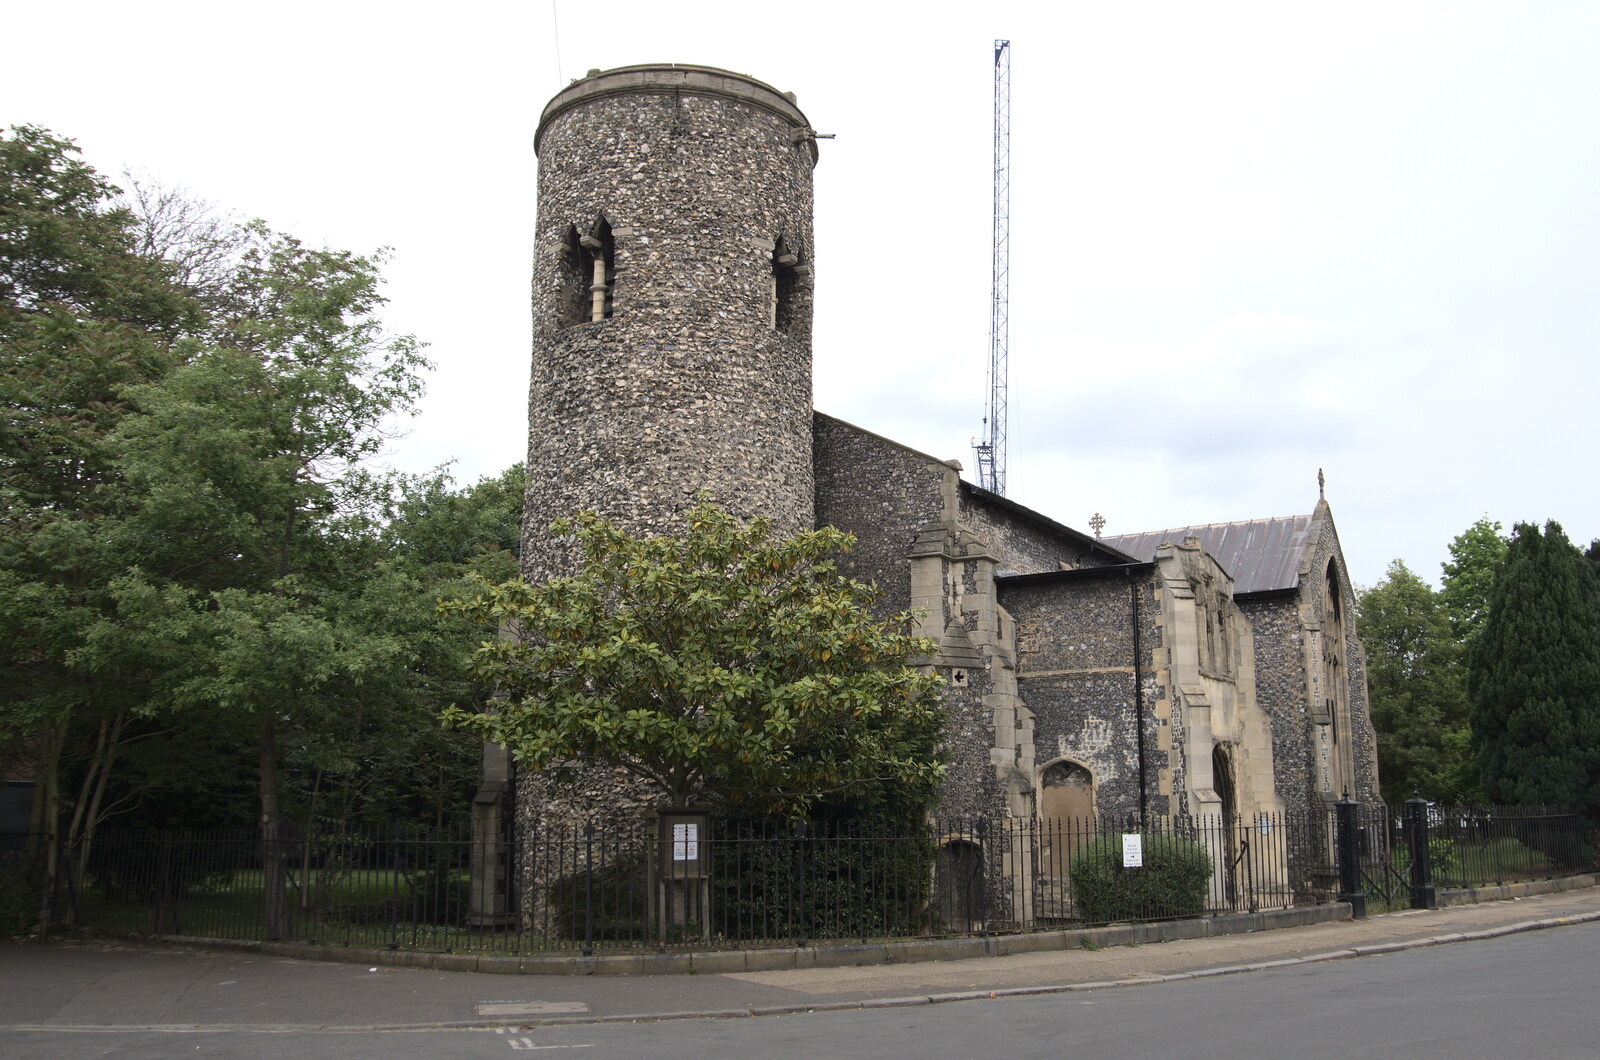 The round-towered St. Mary's Church from Discovering the Hidden City: Norwich, Norfolk - 23rd May 2022